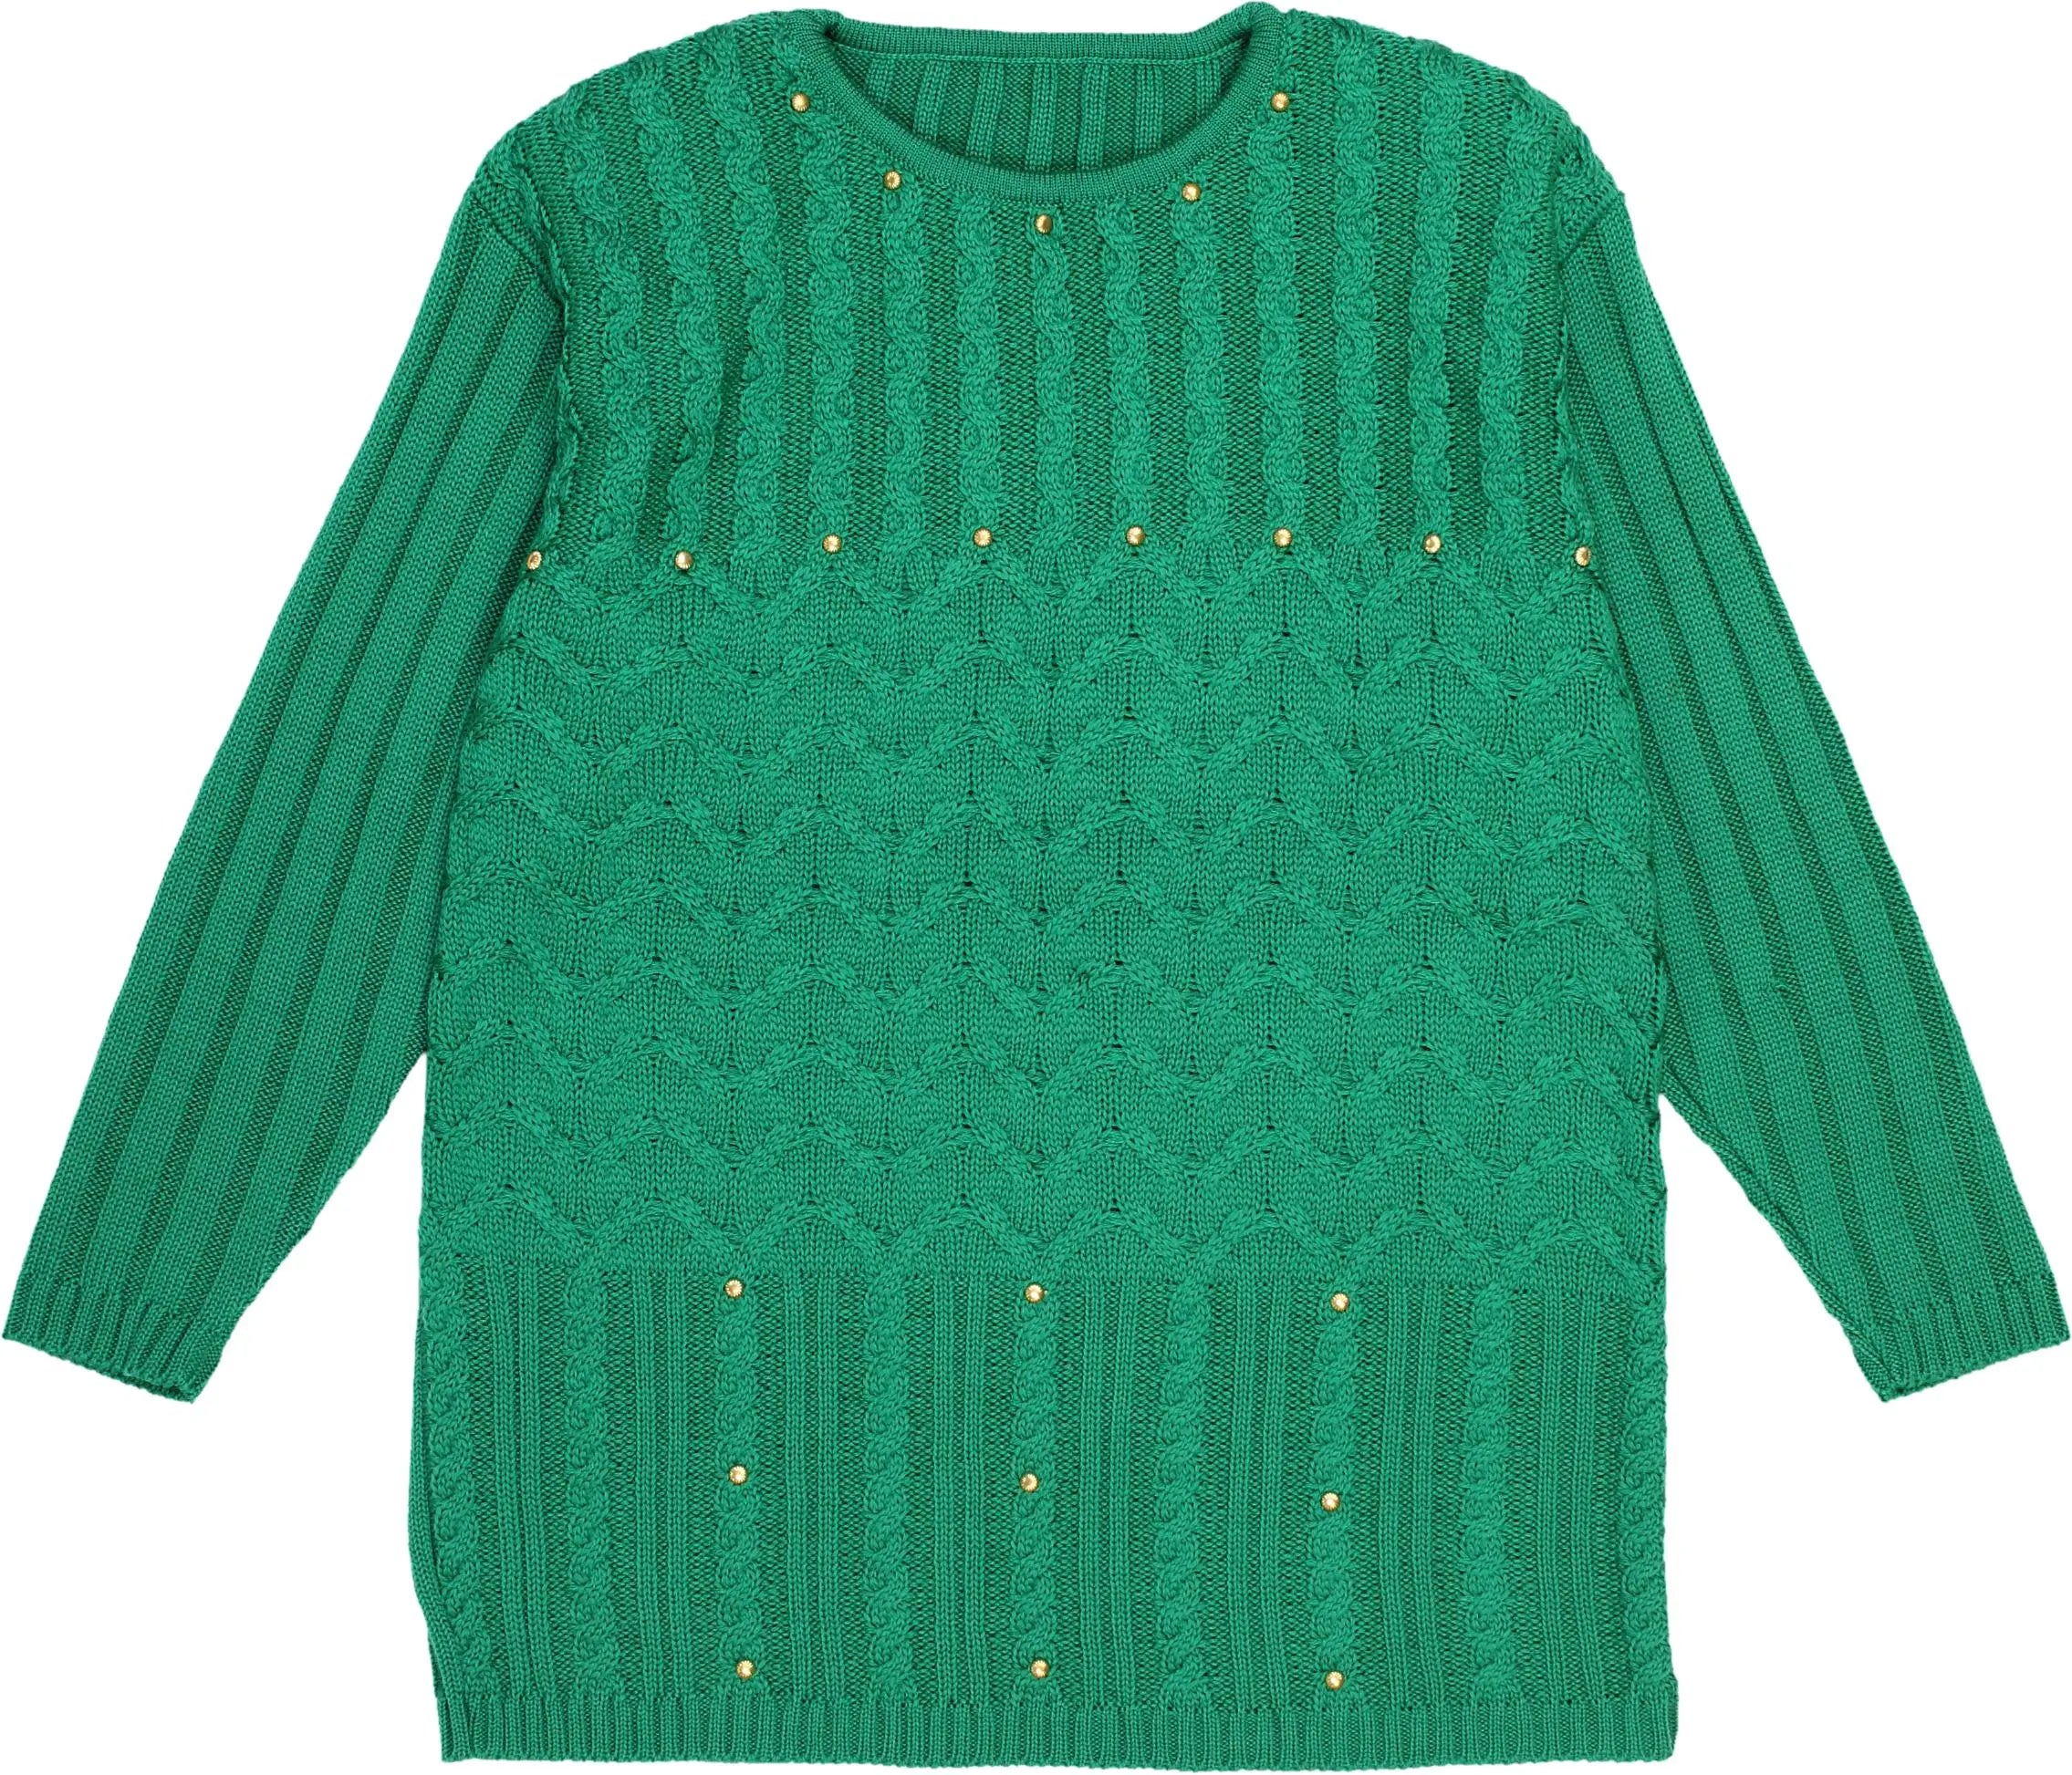 Unknown - 80s Green Jumper with Shoulder Pads- ThriftTale.com - Vintage and second handclothing